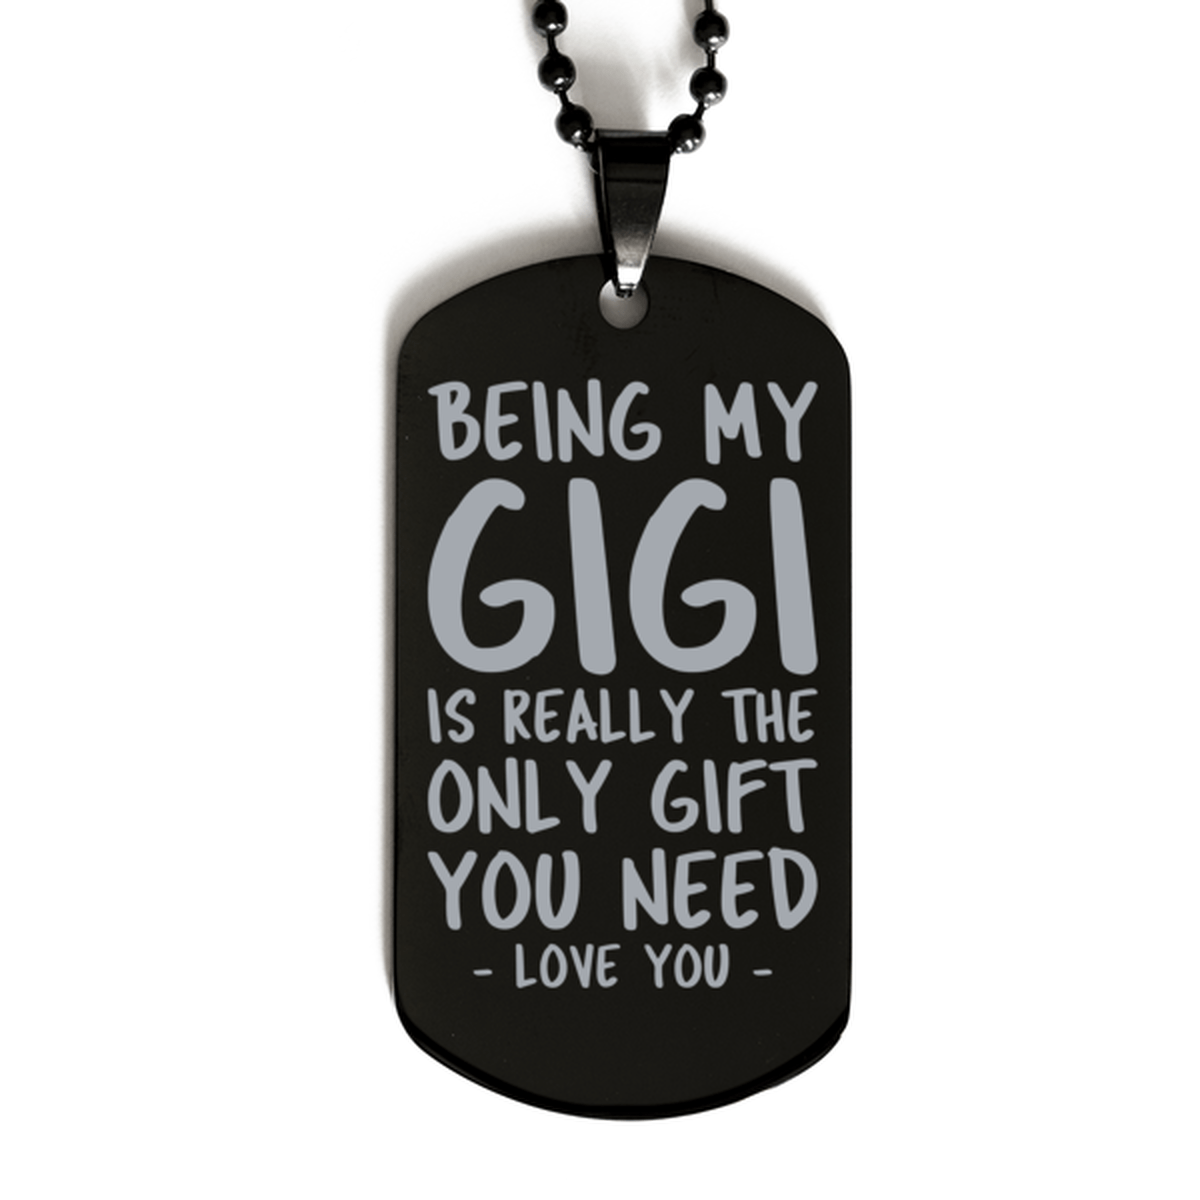 Funny Gigi Black Dog Tag Necklace, Being My Gigi Is Really the Only Gift You Need, Best Birthday Gifts for Gigi